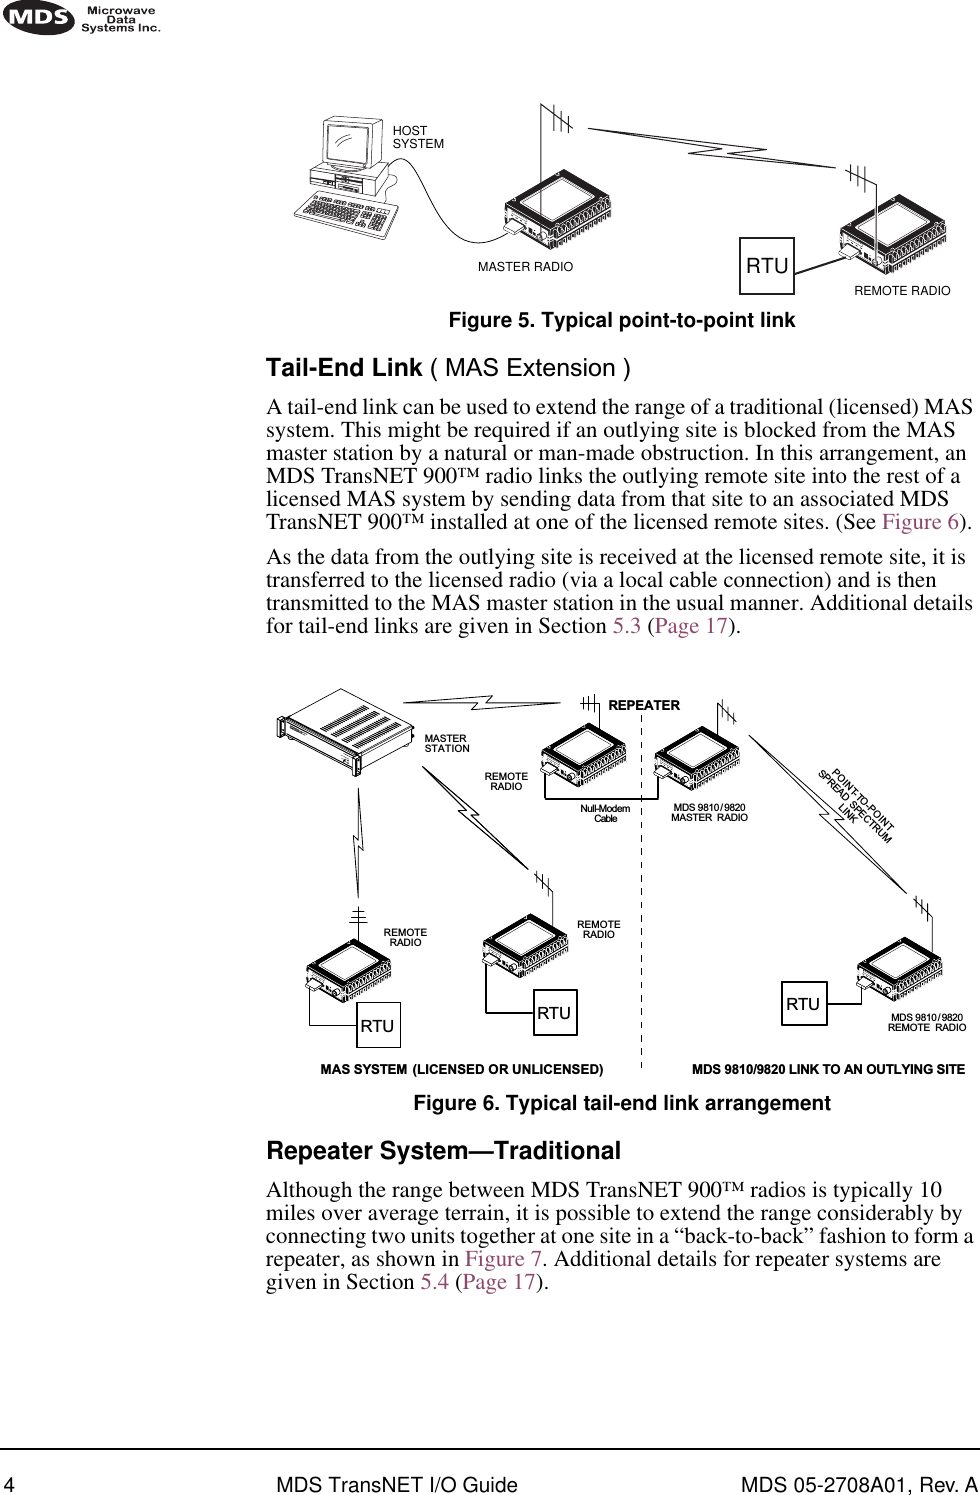  4 MDS TransNET I/O Guide MDS 05-2708A01, Rev. A        Invisible place holder Figure 5. Typical point-to-point link Tail-End Link  ( MAS Extension ) A tail-end link can be used to extend the range of a traditional (licensed) MAS system. This might be required if an outlying site is blocked from the MAS master station by a natural or man-made obstruction. In this arrangement, an MDS TransNET 900™ radio links the outlying remote site into the rest of a licensed MAS system by sending data from that site to an associated MDS TransNET 900™ installed at one of the licensed remote sites. (See Figure 6).As the data from the outlying site is received at the licensed remote site, it is transferred to the licensed radio (via a local cable connection) and is then transmitted to the MAS master station in the usual manner. Additional details for tail-end links are given in Section 5.3 (Page 17). Invisible place holder Figure 6. Typical tail-end link arrangement Repeater System—Traditional Although the range between MDS TransNET 900™ radios is typically 10 miles over average terrain, it is possible to extend the range considerably by connecting two units together at one site in a “back-to-back” fashion to form a repeater, as shown in Figure 7. Additional details for repeater systems are given in Section 5.4 (Page 17).REMOTE RADIORTUMASTER RADIOHOSTSYSTEMPOINT-TO-POINTSPREAD SPECTRUMLINKREMOTERADIOMASTERSTATIONMAS SYSTEM (LICENSED OR UNLICENSED) MDS 9810/9820 LINK TO AN OUTLYING SITEREPEATERRTUREMOTERADIONull-ModemCableRTURTUMDS 9810 / 9820MASTER  RADIOMDS 9810 / 9820REMOTE  RADIOREMOTERADIO